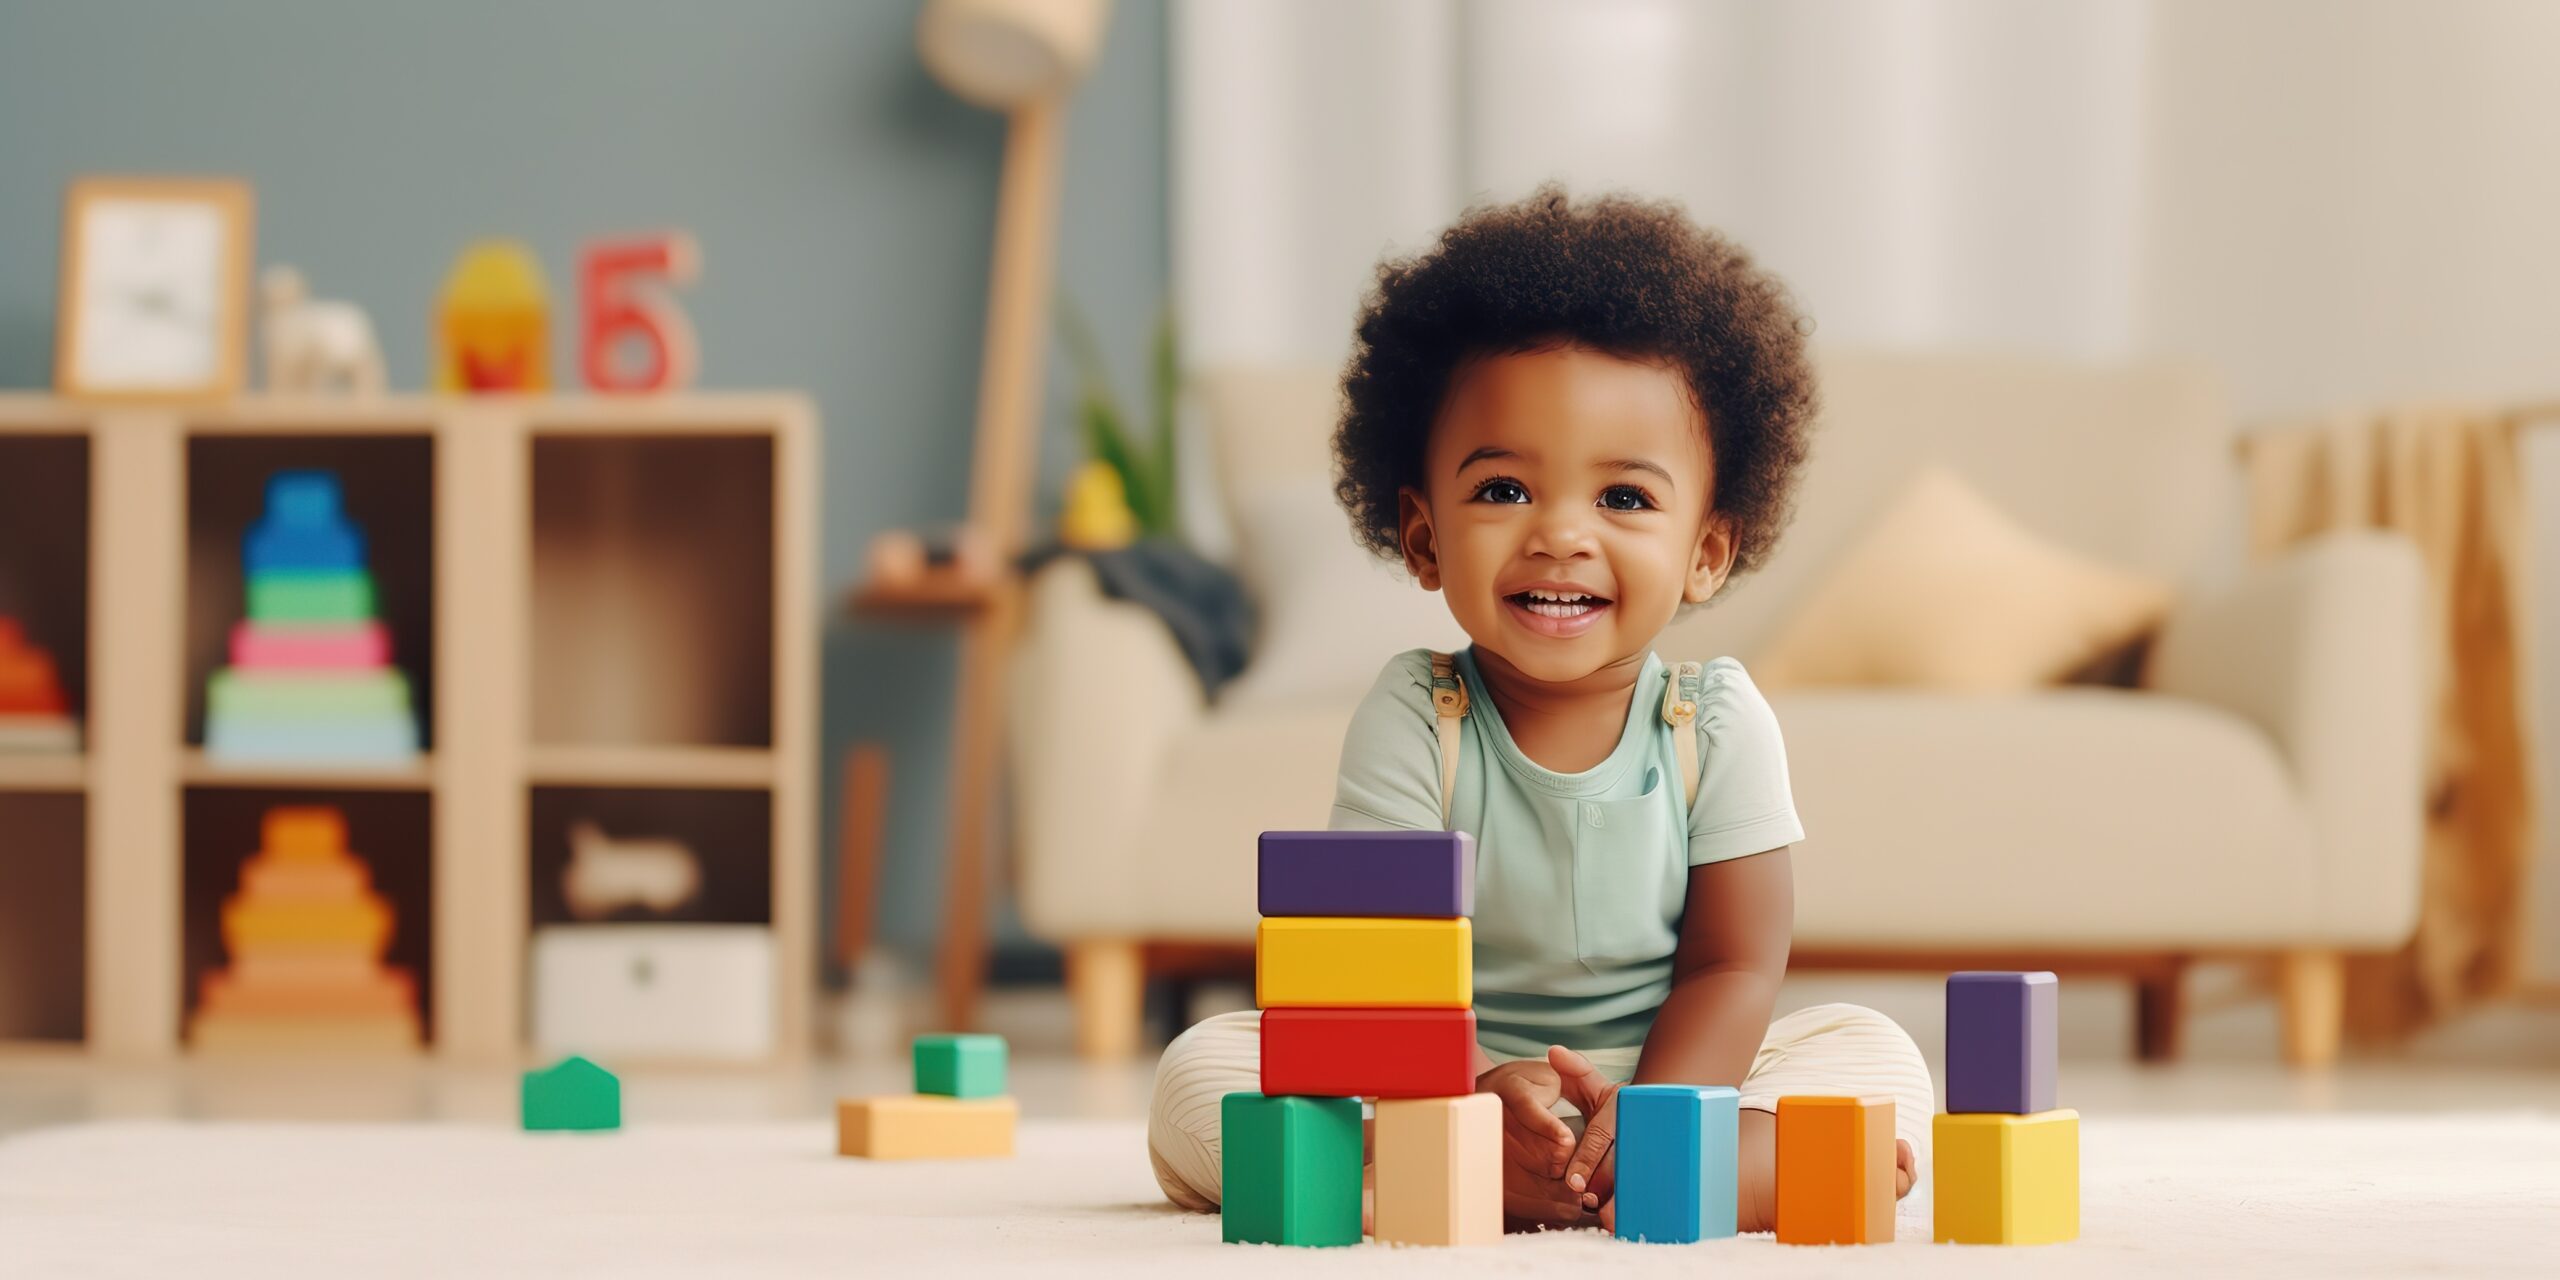 small infant playing with colorful blocks on floor